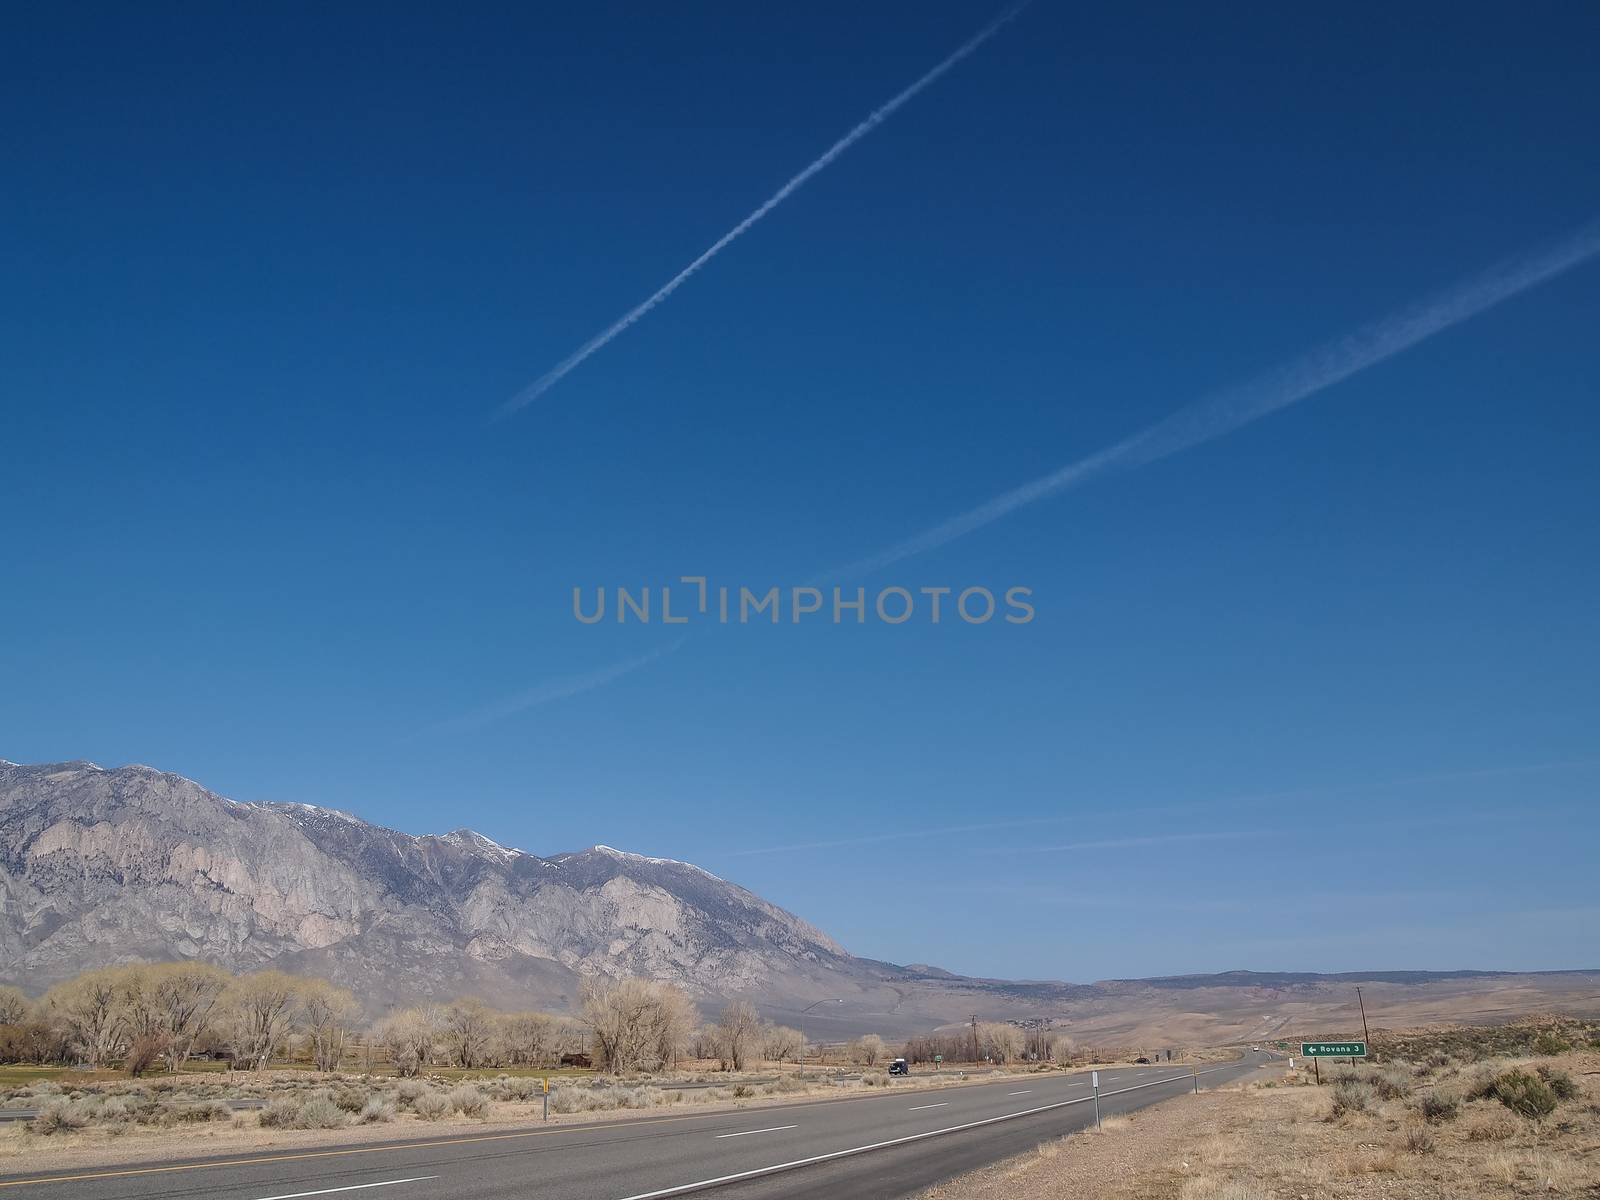 Driving through the snow capped mountains, blue sky, Desert landscape in California , USA